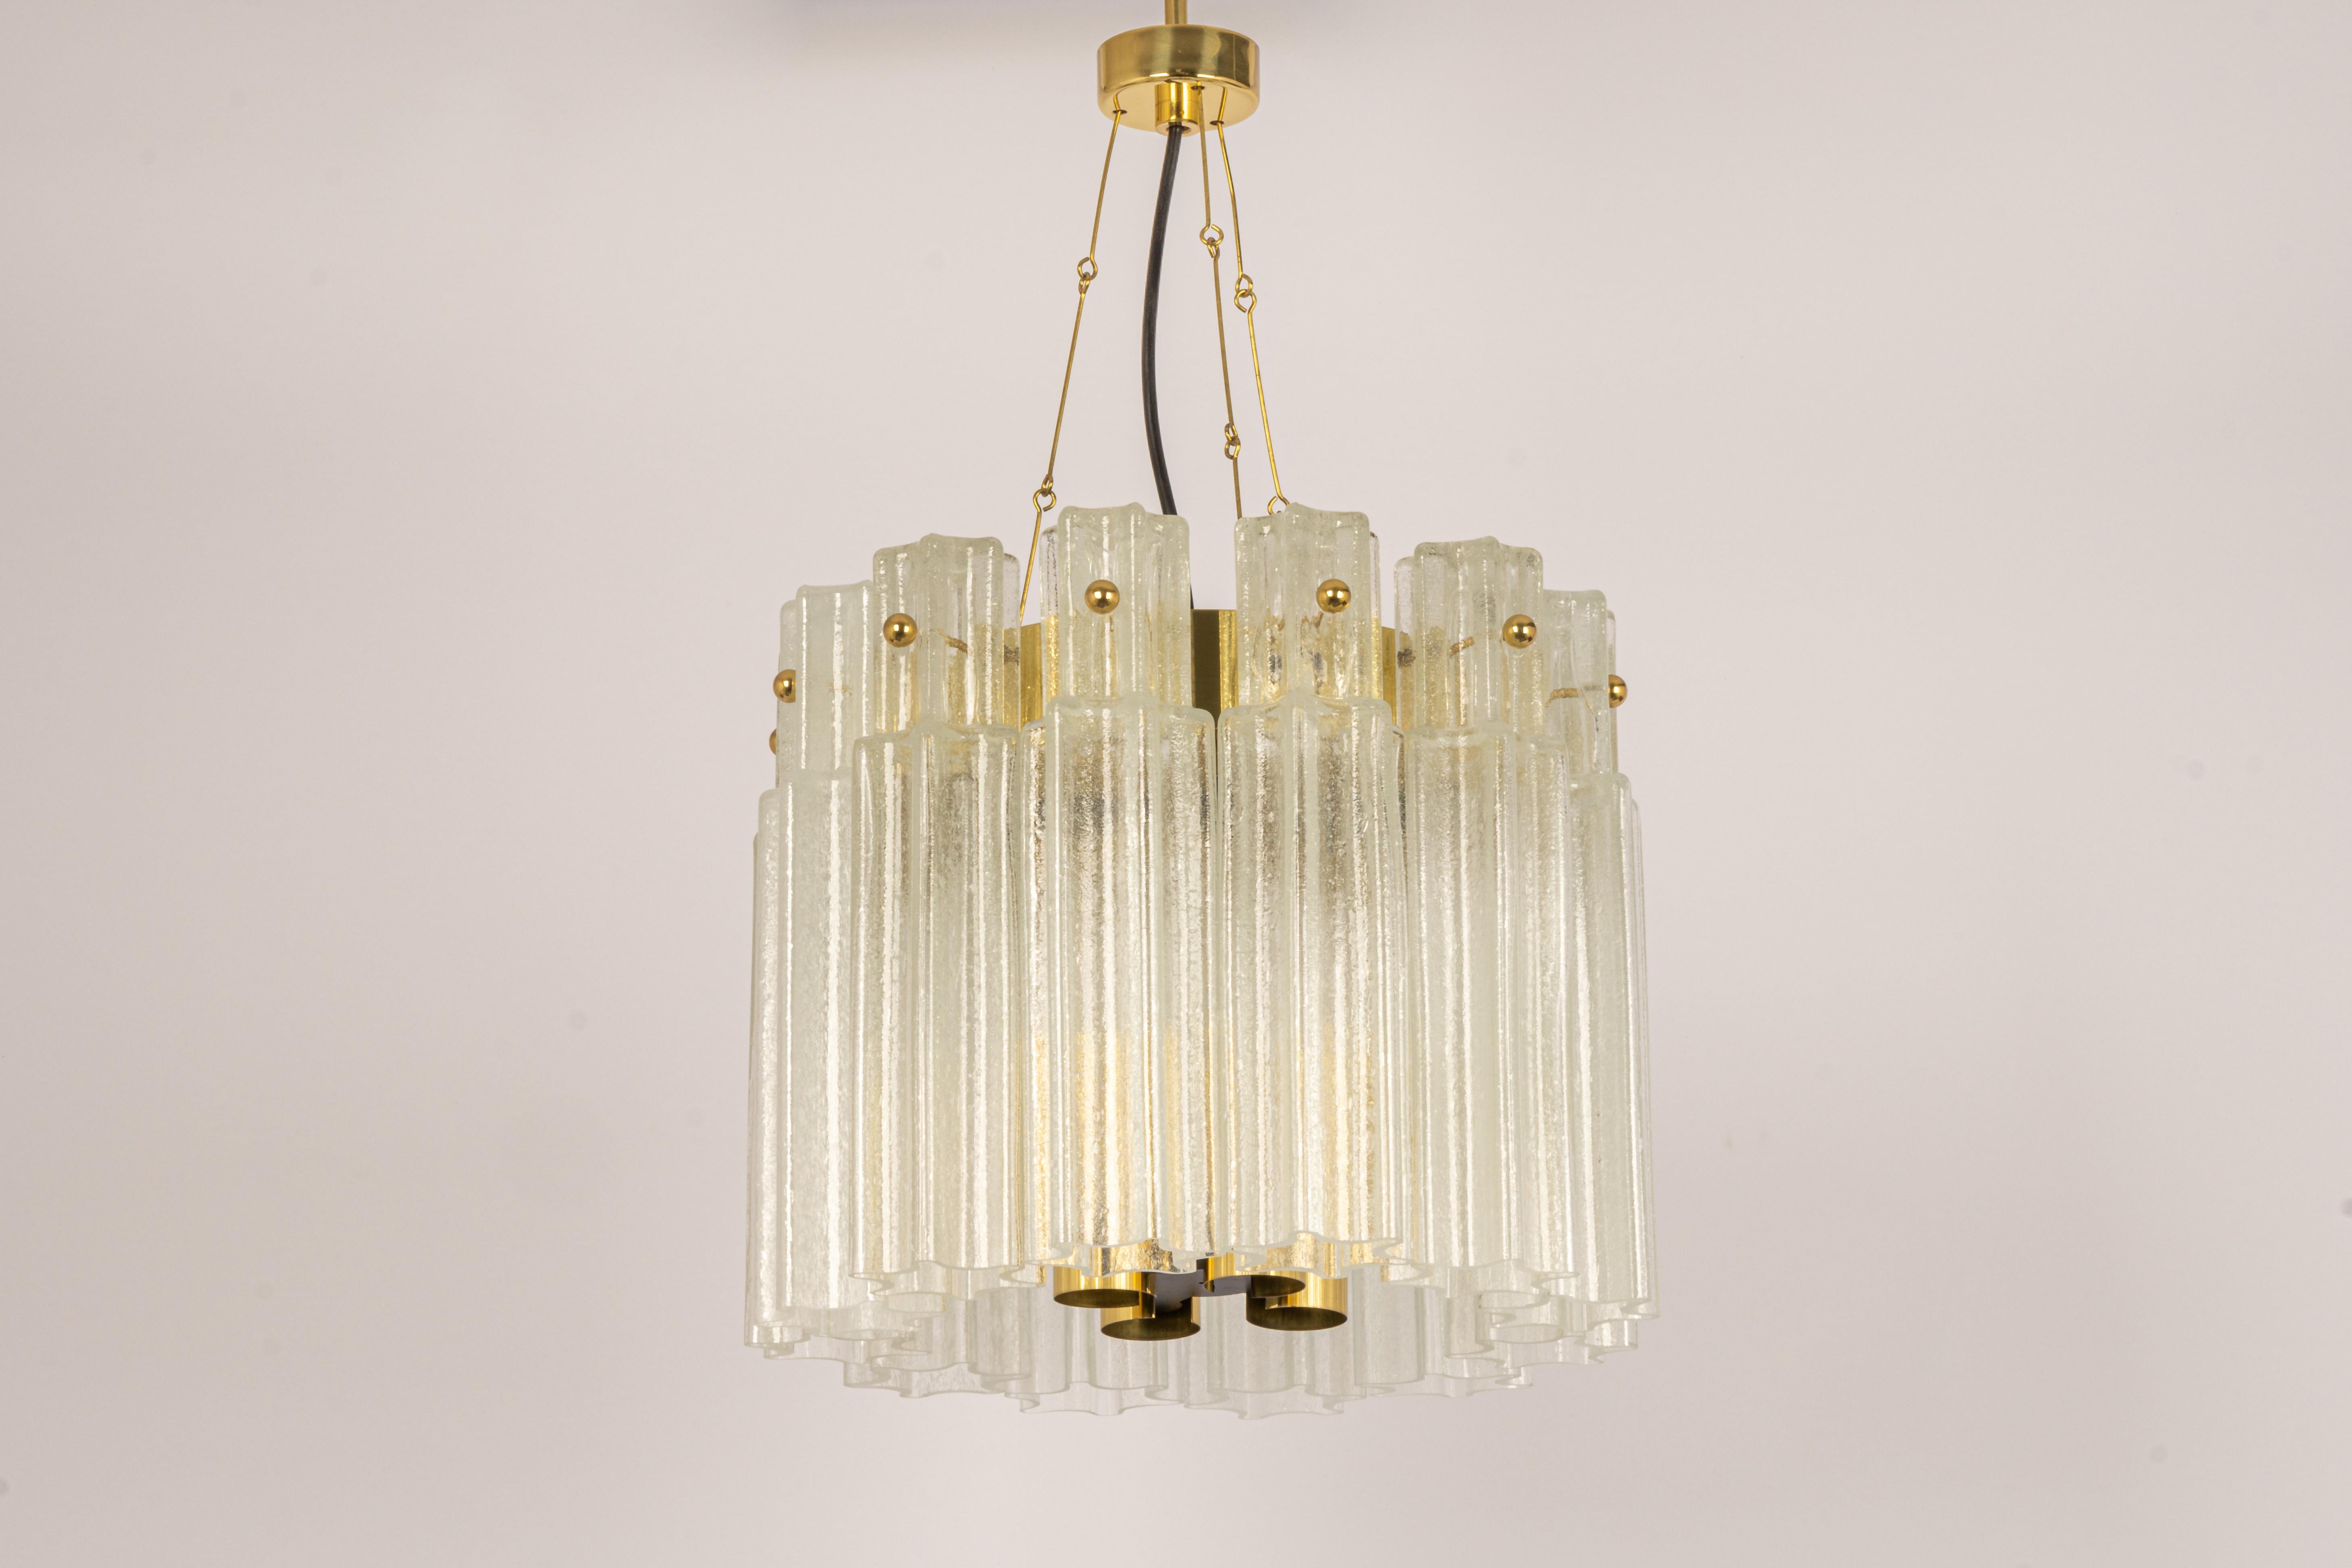 1 of 2 Large pendant lights with hand-blown glass pieces on a brass base made by Glashütte Limburg.

Best of the 1970s from Germany.
High quality and in very good condition. Cleaned, well-wired, and ready to use. 

The fixture requires 4 x E27